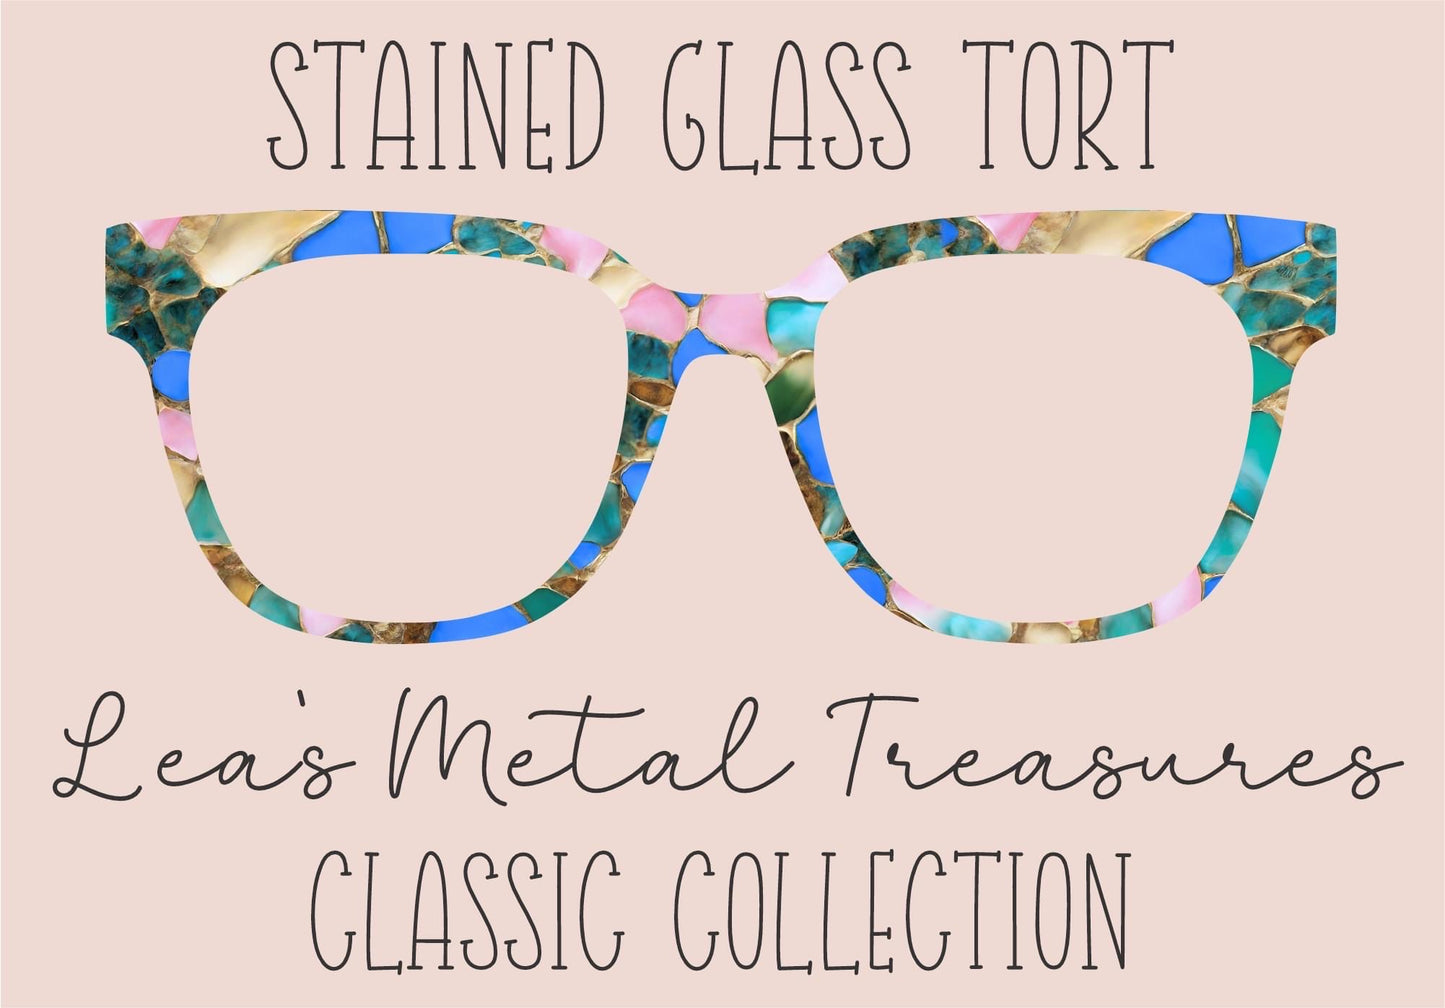 Stained Glass Tort 1